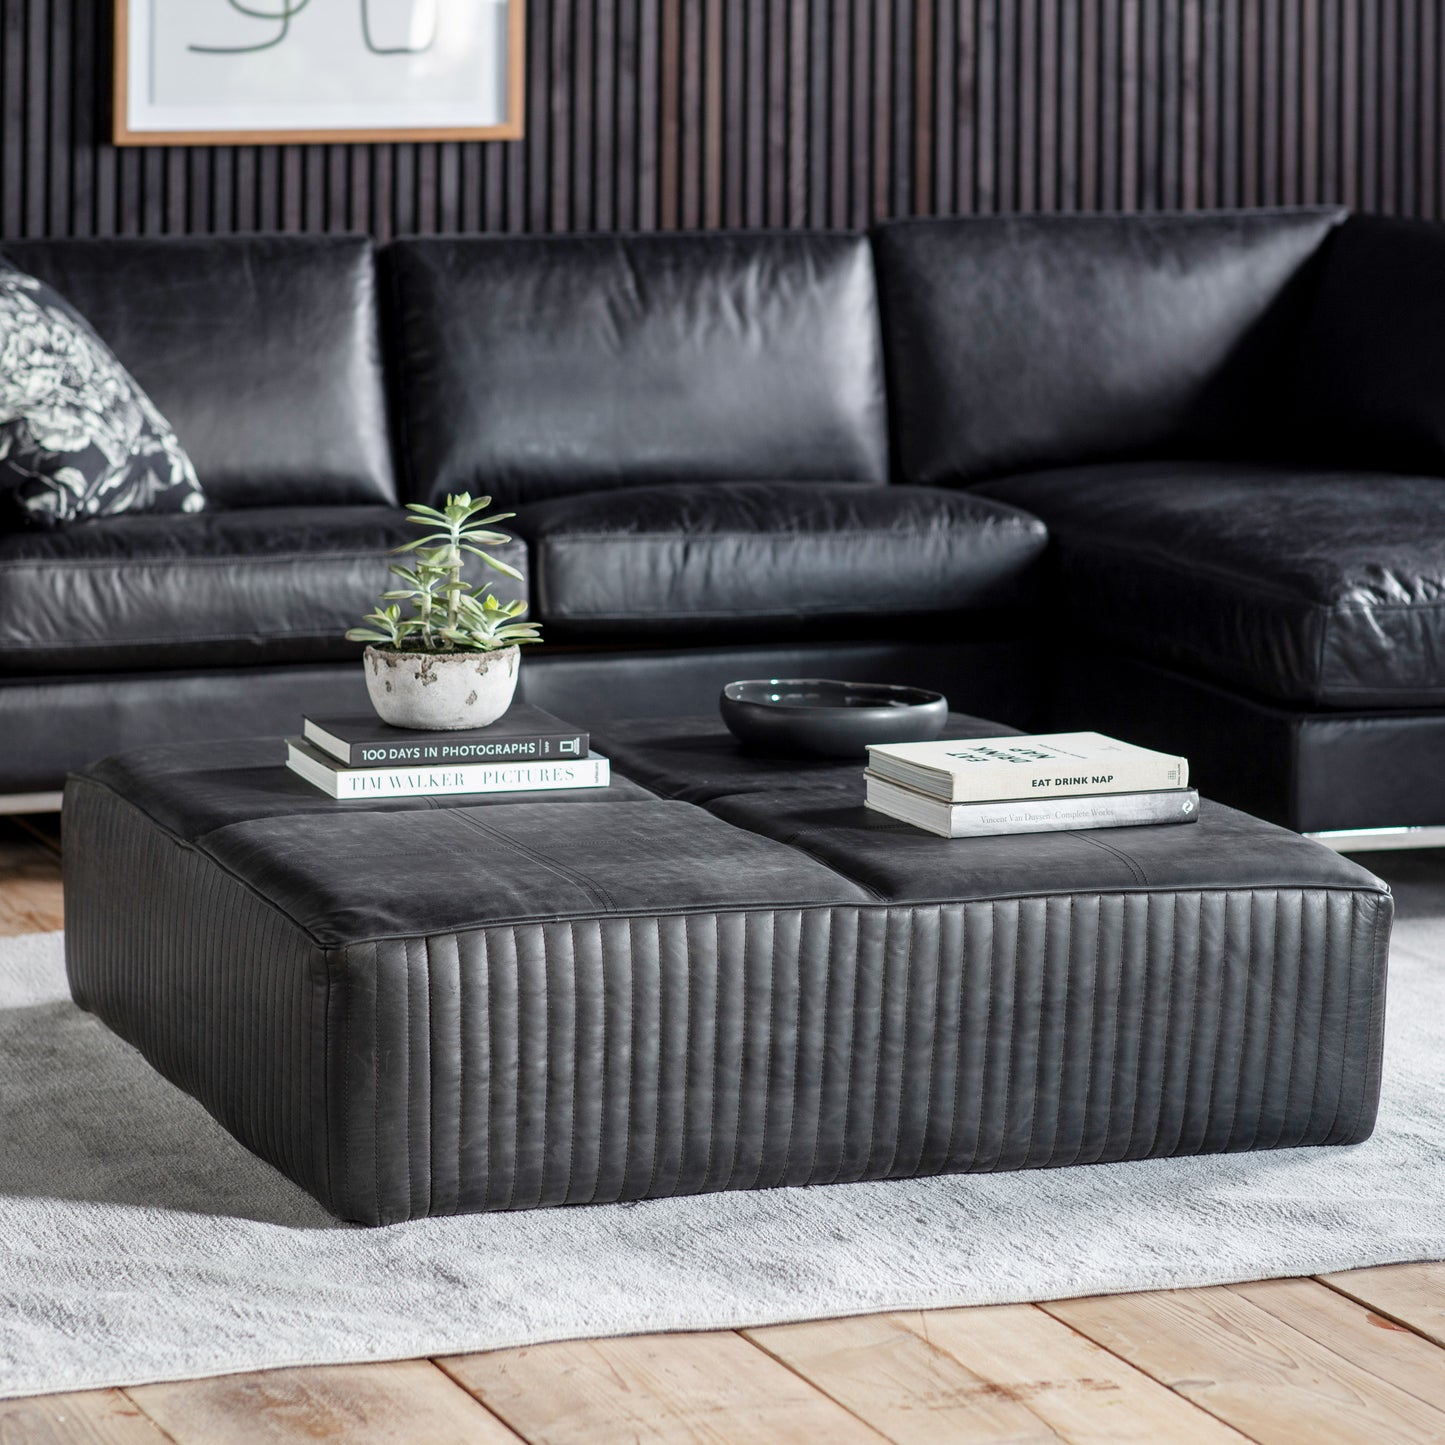 A Cornwood Slab Black Leather 1200x1200x300mm coffee table from Kikiathome.co.uk adds a touch of interior decor to any living room.